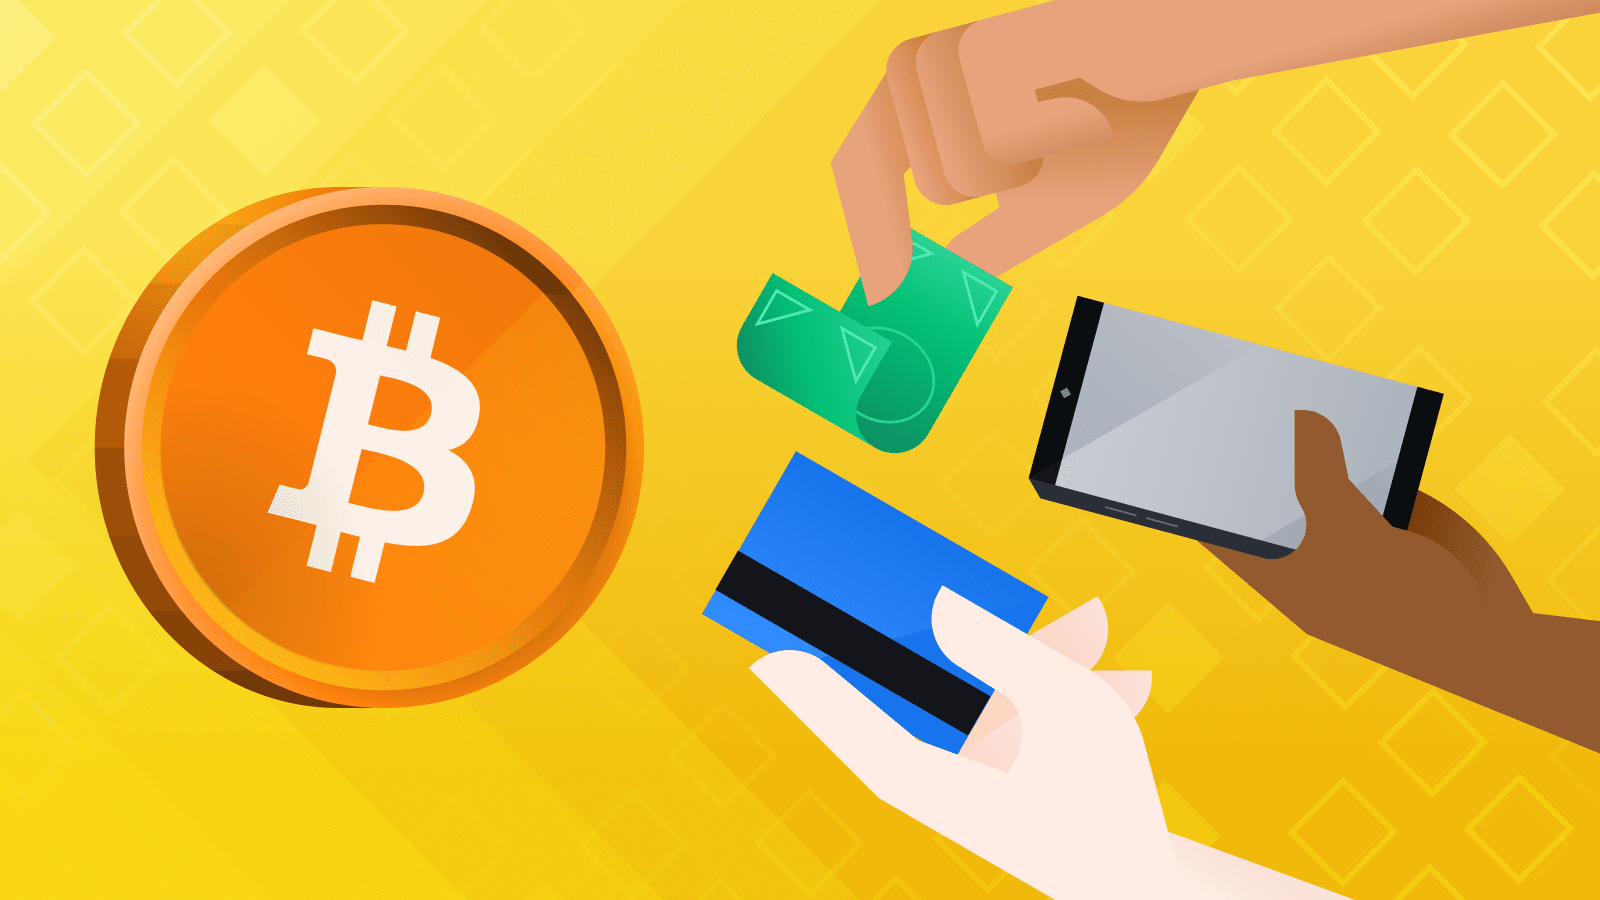 How To: Buy Bitcoin With Cash